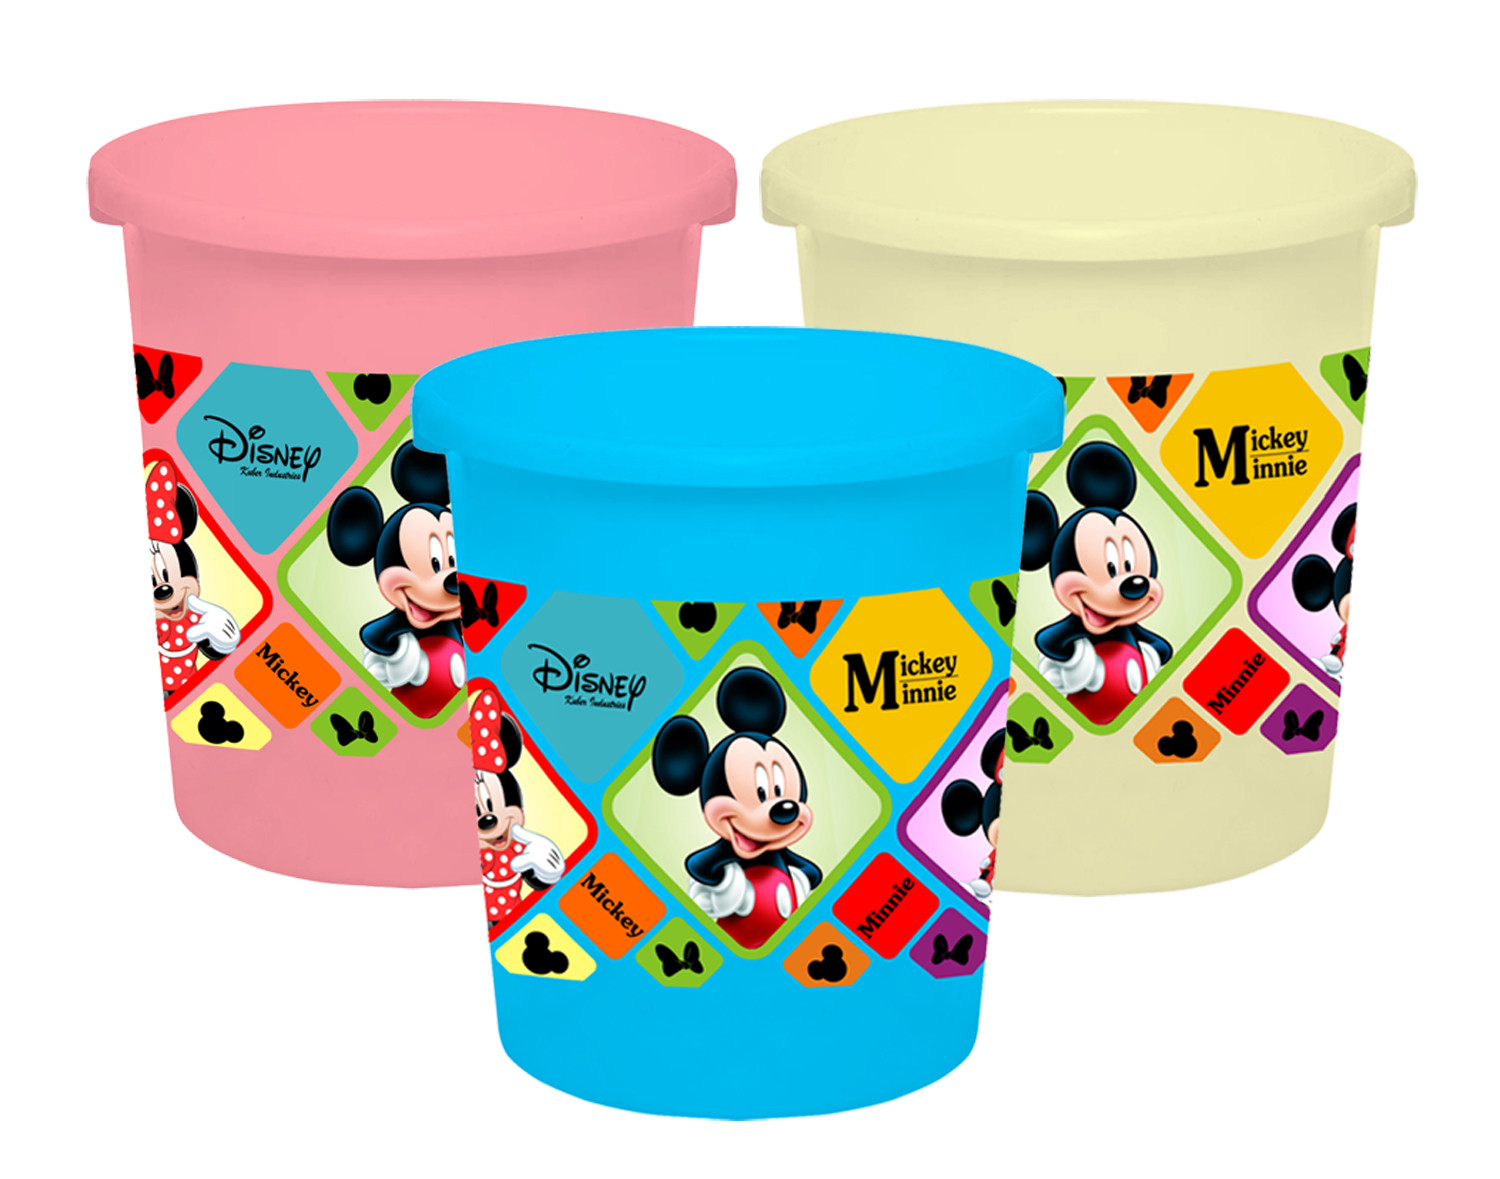 Kuber Industries Disney Mickey Minnie Print Plastic 3 Pieces Garbage Waste Dustbin/Recycling Bin for Home, Office, Factory, 5 Liters (Pink & Cream & Blue) -HS_35_KUBMART17805